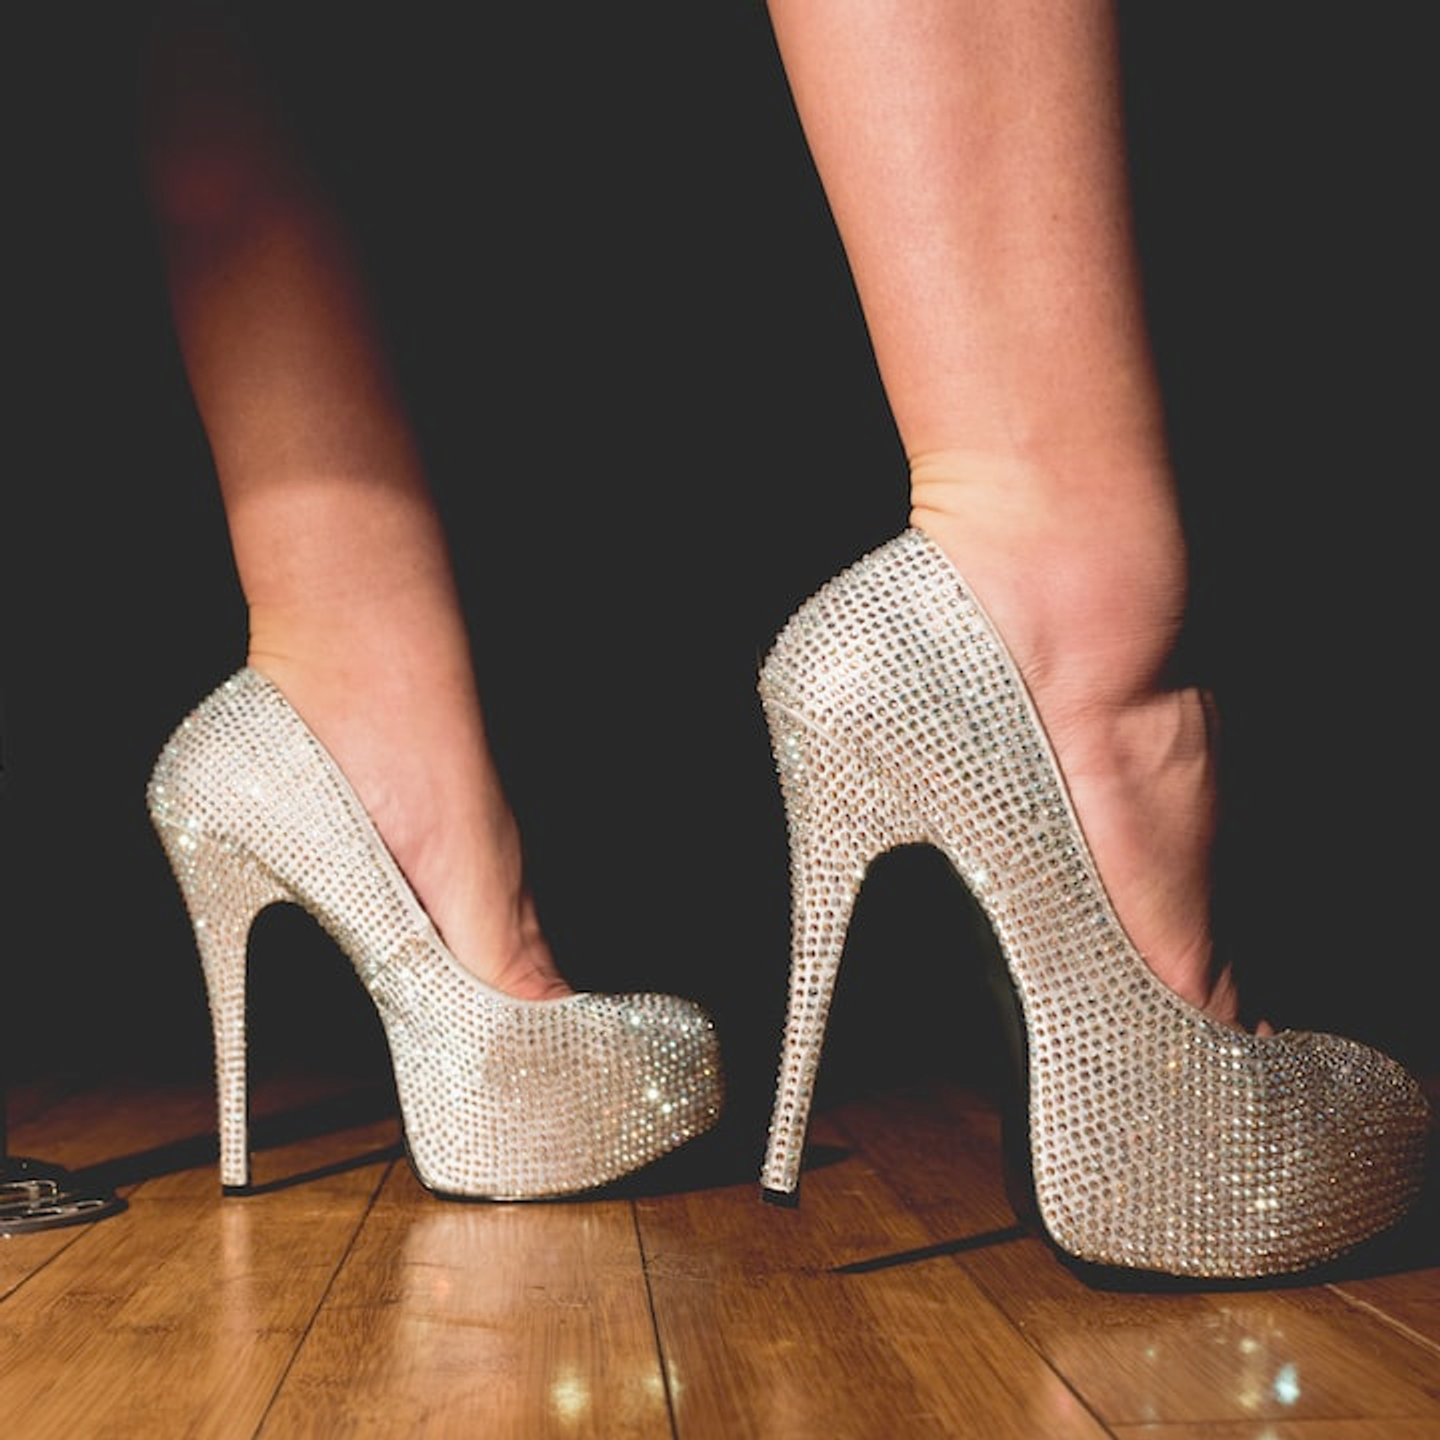 a woman wearing a pair of high heels with rhinestones on them​​​​‌﻿‍﻿​‍​‍‌‍﻿﻿‌﻿​‍‌‍‍‌‌‍‌﻿‌‍‍‌‌‍﻿‍​‍​‍​﻿‍‍​‍​‍‌﻿​﻿‌‍​‌‌‍﻿‍‌‍‍‌‌﻿‌​‌﻿‍‌​‍﻿‍‌‍‍‌‌‍﻿﻿​‍​‍​‍﻿​​‍​‍‌‍‍​‌﻿​‍‌‍‌‌‌‍‌‍​‍​‍​﻿‍‍​‍​‍‌‍‍​‌﻿‌​‌﻿‌​‌﻿​​​﻿‍‍​‍﻿﻿​‍﻿﻿‌‍﻿​‌‍﻿﻿‌‍​﻿‌‍​‌‌‍﻿​‌‍‍​‌‍﻿﻿‌﻿​﻿‌﻿‌​​﻿‍‍​﻿​﻿​﻿​﻿​﻿​﻿​﻿​﻿​‍﻿﻿‌‍‍‌‌‍﻿‍‌﻿‌​‌‍‌‌‌‍﻿‍‌﻿‌​​‍﻿﻿‌‍‌‌‌‍‌​‌‍‍‌‌﻿‌​​‍﻿﻿‌‍﻿‌‌‍﻿﻿‌‍‌​‌‍‌‌​﻿﻿‌‌﻿​​‌﻿​‍‌‍‌‌‌﻿​﻿‌‍‌‌‌‍﻿‍‌﻿‌​‌‍​‌‌﻿‌​‌‍‍‌‌‍﻿﻿‌‍﻿‍​﻿‍﻿‌‍‍‌‌‍‌​​﻿﻿‌​﻿‌﻿‌‍‌‌‌‍‌‌​﻿‍‌​﻿‌‍​﻿​‌‌‍‌‌​﻿​​​‍﻿‌​﻿‍‌​﻿​‍​﻿‌‍‌‍‌‌​‍﻿‌​﻿‌​‌‍‌​‌‍‌​​﻿‌﻿​‍﻿‌‌‍​‍​﻿​‍​﻿‍​​﻿‍‌​‍﻿‌​﻿‌‌​﻿‌﻿‌‍​‍‌‍‌‍‌‍​‌​﻿‌​‌‍‌​​﻿​​​﻿​‍‌‍​‍‌‍‌‌​﻿‌​​﻿‍﻿‌﻿‌​‌﻿‍‌‌﻿​​‌‍‌‌​﻿﻿‌‌﻿​﻿‌‍‍​‌‍﻿﻿‌‍‌‌​﻿‍﻿‌﻿​​‌‍​‌‌﻿‌​‌‍‍​​﻿﻿‌‌‍﻿‌‌‍‌‌‌‍‌​‌‍‍‌‌‍​‌​‍‌‌​﻿‌‌‌​​‍‌‌﻿﻿‌‍‍﻿‌‍‌‌‌﻿‍‌​‍‌‌​﻿​﻿‌​‌​​‍‌‌​﻿​﻿‌​‌​​‍‌‌​﻿​‍​﻿​‍‌‍​‌‌‍‌​​﻿‌‌‌‍‌‌​﻿‍‌‌‍​‌​﻿‌﻿‌‍‌​‌‍​‌​﻿‍​​﻿​‍​﻿‍​​‍‌‌​﻿​‍​﻿​‍​‍‌‌​﻿‌‌‌​‌​​‍﻿‍‌‍​‌‌‍﻿​‌﻿‌​​﻿﻿﻿‌‍​‍‌‍​‌‌﻿​﻿‌‍‌‌‌‌‌‌‌﻿​‍‌‍﻿​​﻿﻿‌‌‍‍​‌﻿‌​‌﻿‌​‌﻿​​​‍‌‌​﻿​﻿‌​​‌​‍‌‌​﻿​‍‌​‌‍​‍‌‌​﻿​‍‌​‌‍‌‍﻿​‌‍﻿﻿‌‍​﻿‌‍​‌‌‍﻿​‌‍‍​‌‍﻿﻿‌﻿​﻿‌﻿‌​​‍‌‌​﻿​﻿‌​​‌​﻿​﻿​﻿​﻿​﻿​﻿​﻿​﻿​‍‌‍‌‍‍‌‌‍‌​​﻿﻿‌​﻿‌﻿‌‍‌‌‌‍‌‌​﻿‍‌​﻿‌‍​﻿​‌‌‍‌‌​﻿​​​‍﻿‌​﻿‍‌​﻿​‍​﻿‌‍‌‍‌‌​‍﻿‌​﻿‌​‌‍‌​‌‍‌​​﻿‌﻿​‍﻿‌‌‍​‍​﻿​‍​﻿‍​​﻿‍‌​‍﻿‌​﻿‌‌​﻿‌﻿‌‍​‍‌‍‌‍‌‍​‌​﻿‌​‌‍‌​​﻿​​​﻿​‍‌‍​‍‌‍‌‌​﻿‌​​‍‌‍‌﻿‌​‌﻿‍‌‌﻿​​‌‍‌‌​﻿﻿‌‌﻿​﻿‌‍‍​‌‍﻿﻿‌‍‌‌​‍‌‍‌﻿​​‌‍​‌‌﻿‌​‌‍‍​​﻿﻿‌‌‍﻿‌‌‍‌‌‌‍‌​‌‍‍‌‌‍​‌​‍‌‌​﻿‌‌‌​​‍‌‌﻿﻿‌‍‍﻿‌‍‌‌‌﻿‍‌​‍‌‌​﻿​﻿‌​‌​​‍‌‌​﻿​﻿‌​‌​​‍‌‌​﻿​‍​﻿​‍‌‍​‌‌‍‌​​﻿‌‌‌‍‌‌​﻿‍‌‌‍​‌​﻿‌﻿‌‍‌​‌‍​‌​﻿‍​​﻿​‍​﻿‍​​‍‌‌​﻿​‍​﻿​‍​‍‌‌​﻿‌‌‌​‌​​‍﻿‍‌‍​‌‌‍﻿​‌﻿‌​​‍​‍‌﻿﻿‌